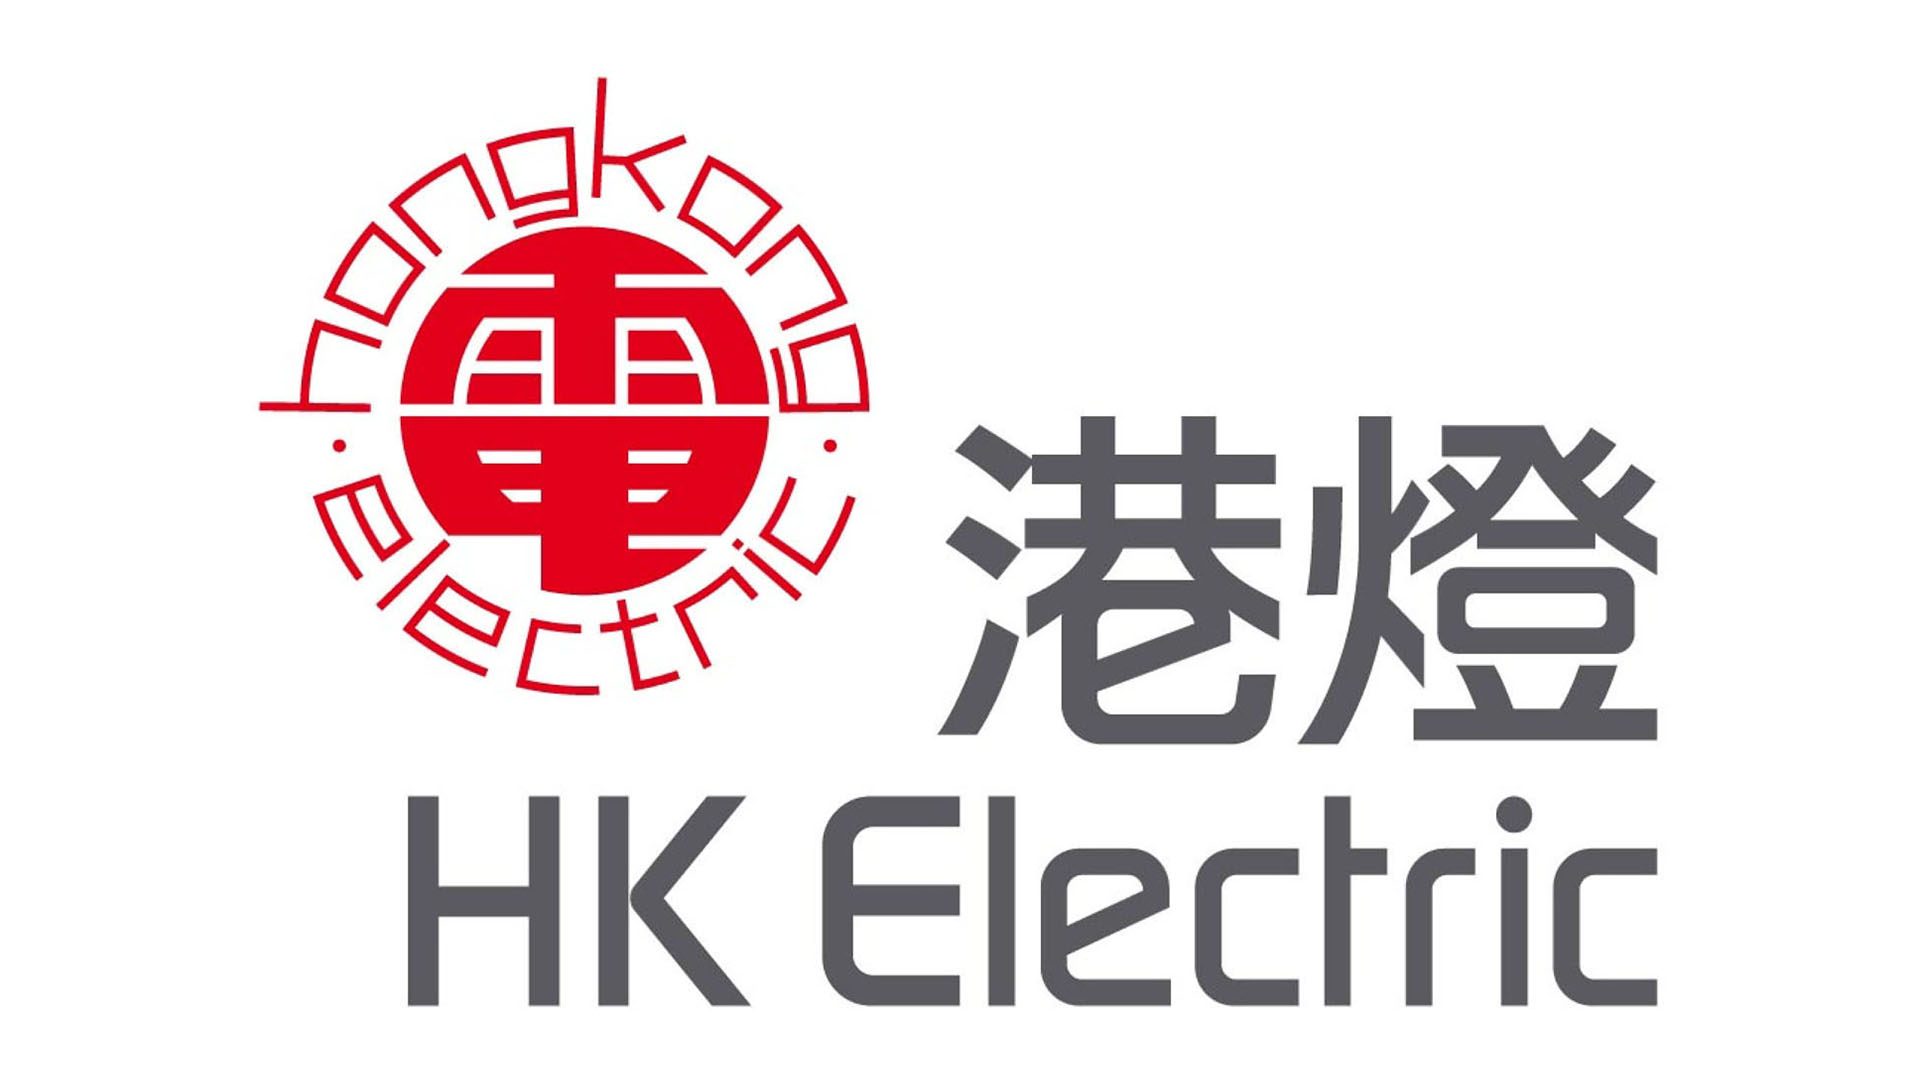 HK Electric Investments Limited